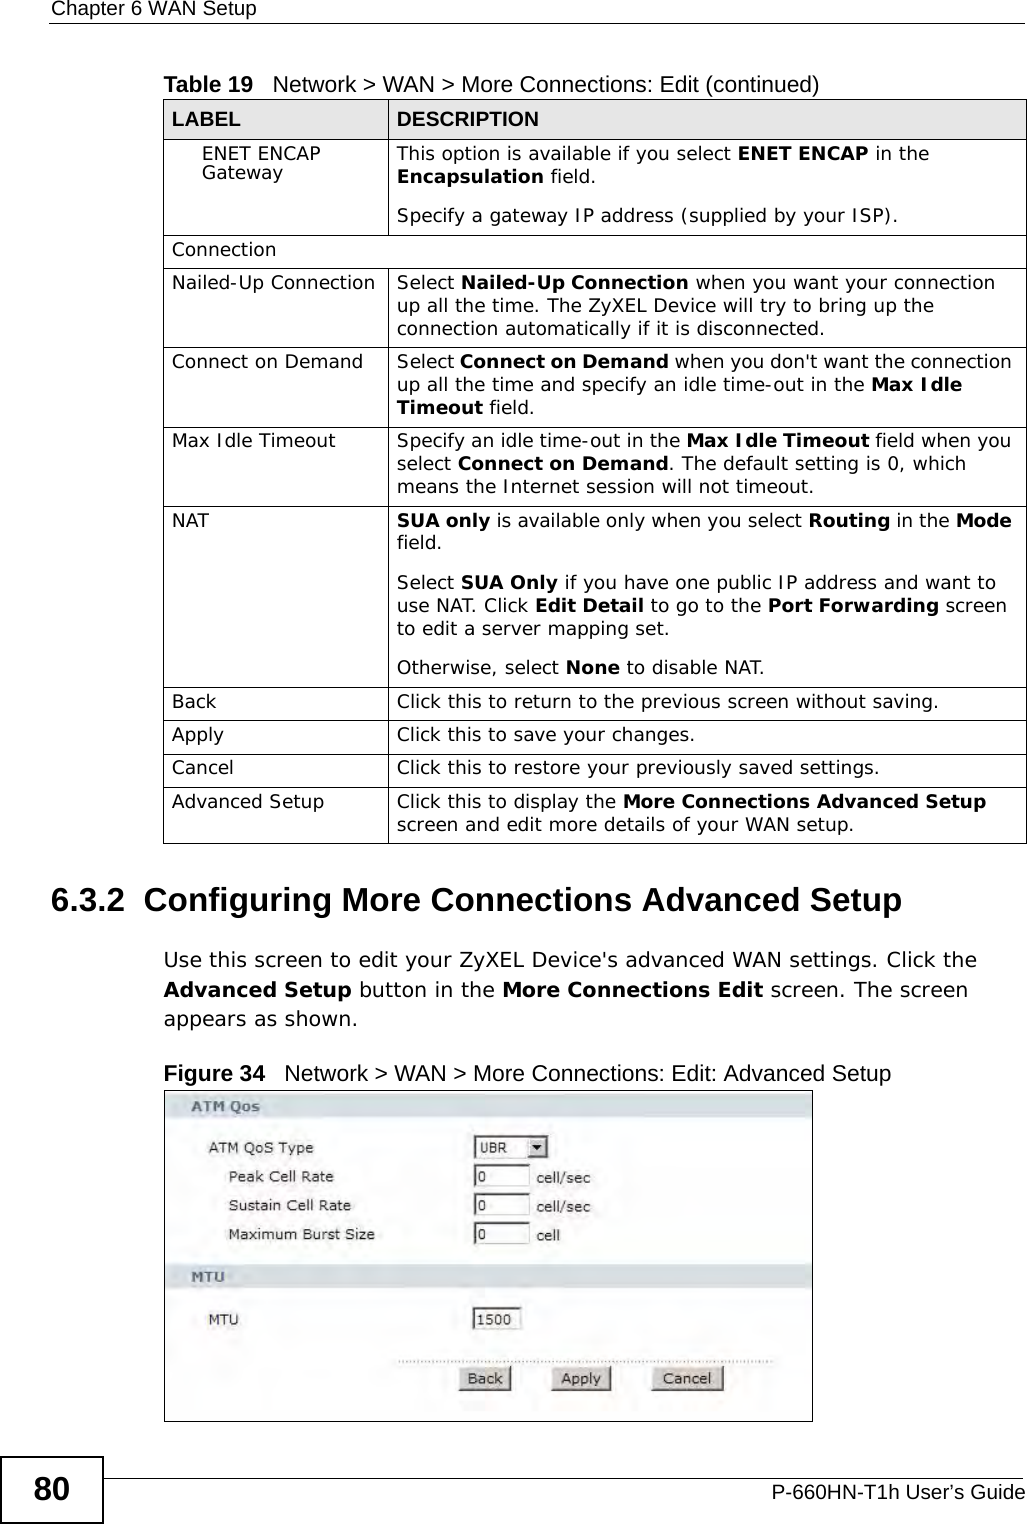 Chapter 6 WAN SetupP-660HN-T1h User’s Guide806.3.2  Configuring More Connections Advanced Setup Use this screen to edit your ZyXEL Device&apos;s advanced WAN settings. Click the Advanced Setup button in the More Connections Edit screen. The screen appears as shown.Figure 34   Network &gt; WAN &gt; More Connections: Edit: Advanced SetupENET ENCAP Gateway This option is available if you select ENET ENCAP in the Encapsulation field.Specify a gateway IP address (supplied by your ISP).ConnectionNailed-Up Connection Select Nailed-Up Connection when you want your connection up all the time. The ZyXEL Device will try to bring up the connection automatically if it is disconnected.Connect on Demand Select Connect on Demand when you don&apos;t want the connection up all the time and specify an idle time-out in the Max Idle Timeout field.Max Idle Timeout Specify an idle time-out in the Max Idle Timeout field when you select Connect on Demand. The default setting is 0, which means the Internet session will not timeout.NAT SUA only is available only when you select Routing in the Mode field.Select SUA Only if you have one public IP address and want to use NAT. Click Edit Detail to go to the Port Forwarding screen to edit a server mapping set. Otherwise, select None to disable NAT.Back Click this to return to the previous screen without saving.Apply Click this to save your changes. Cancel Click this to restore your previously saved settings.Advanced Setup Click this to display the More Connections Advanced Setup screen and edit more details of your WAN setup.Table 19   Network &gt; WAN &gt; More Connections: Edit (continued)LABEL DESCRIPTION